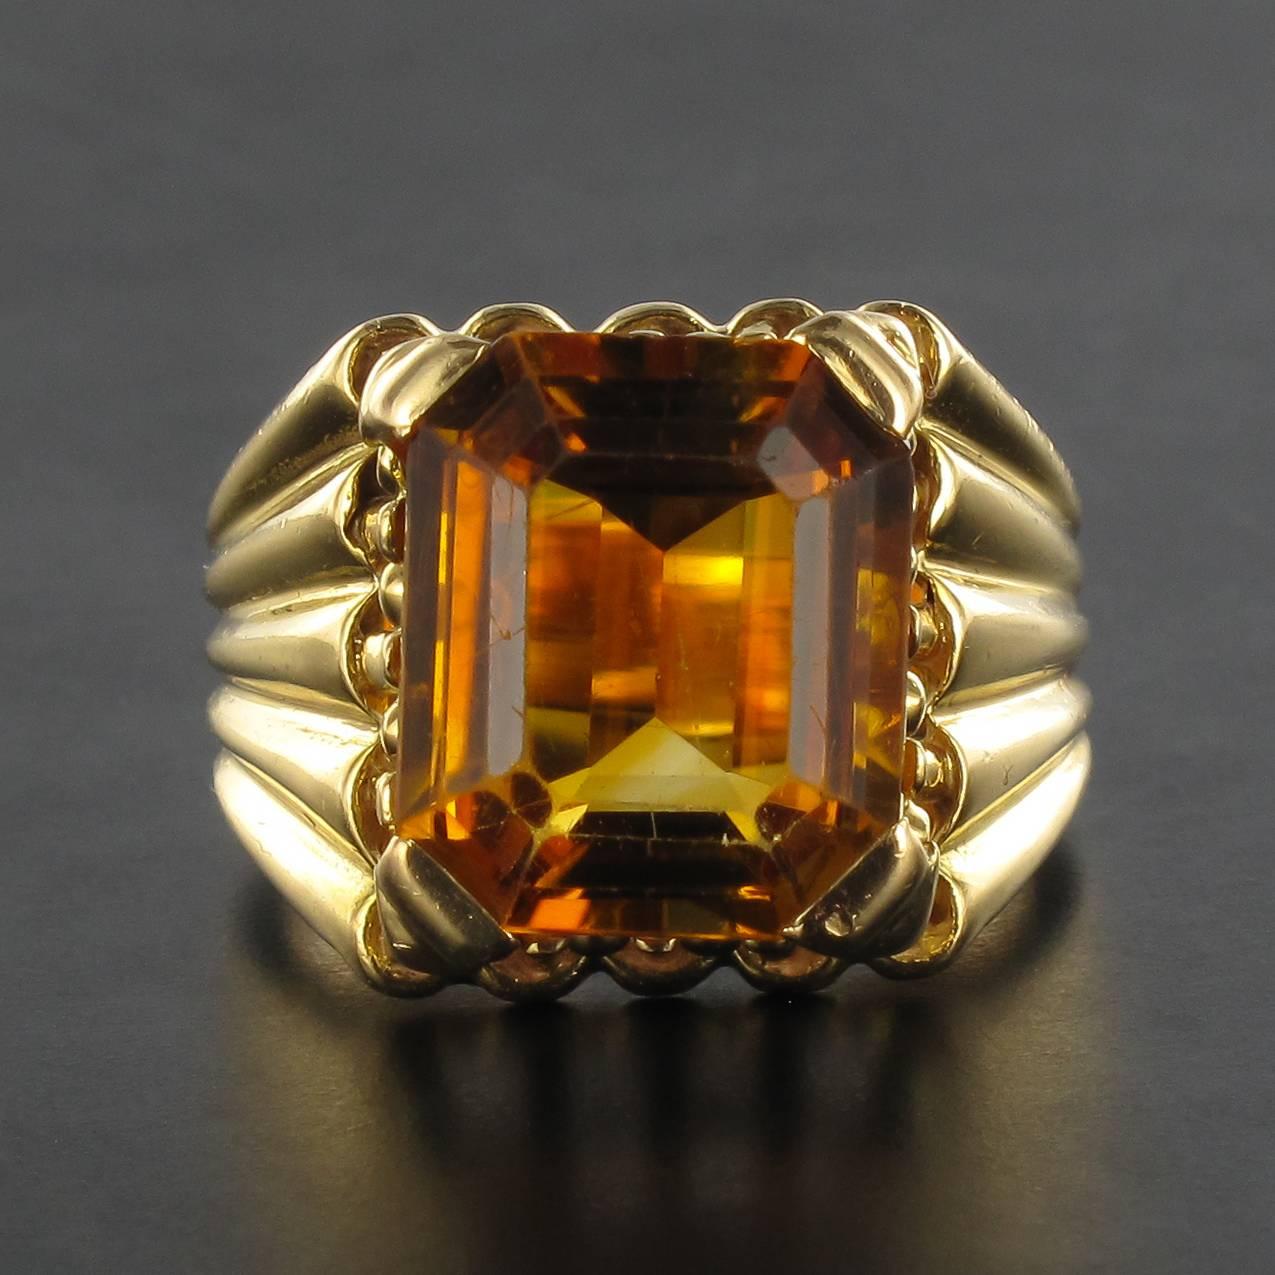 Ring in 18 carat yellow gold, eagle head hallmark. 
This antique ring is claw set with an emerald cut citrine. It has an openwork mount and the band is gadrooned. 
Length: 1.48 cm, Width: 1.3 cm, Height: 1.27 cm, Width of the ring: 4.7 mm.
Total